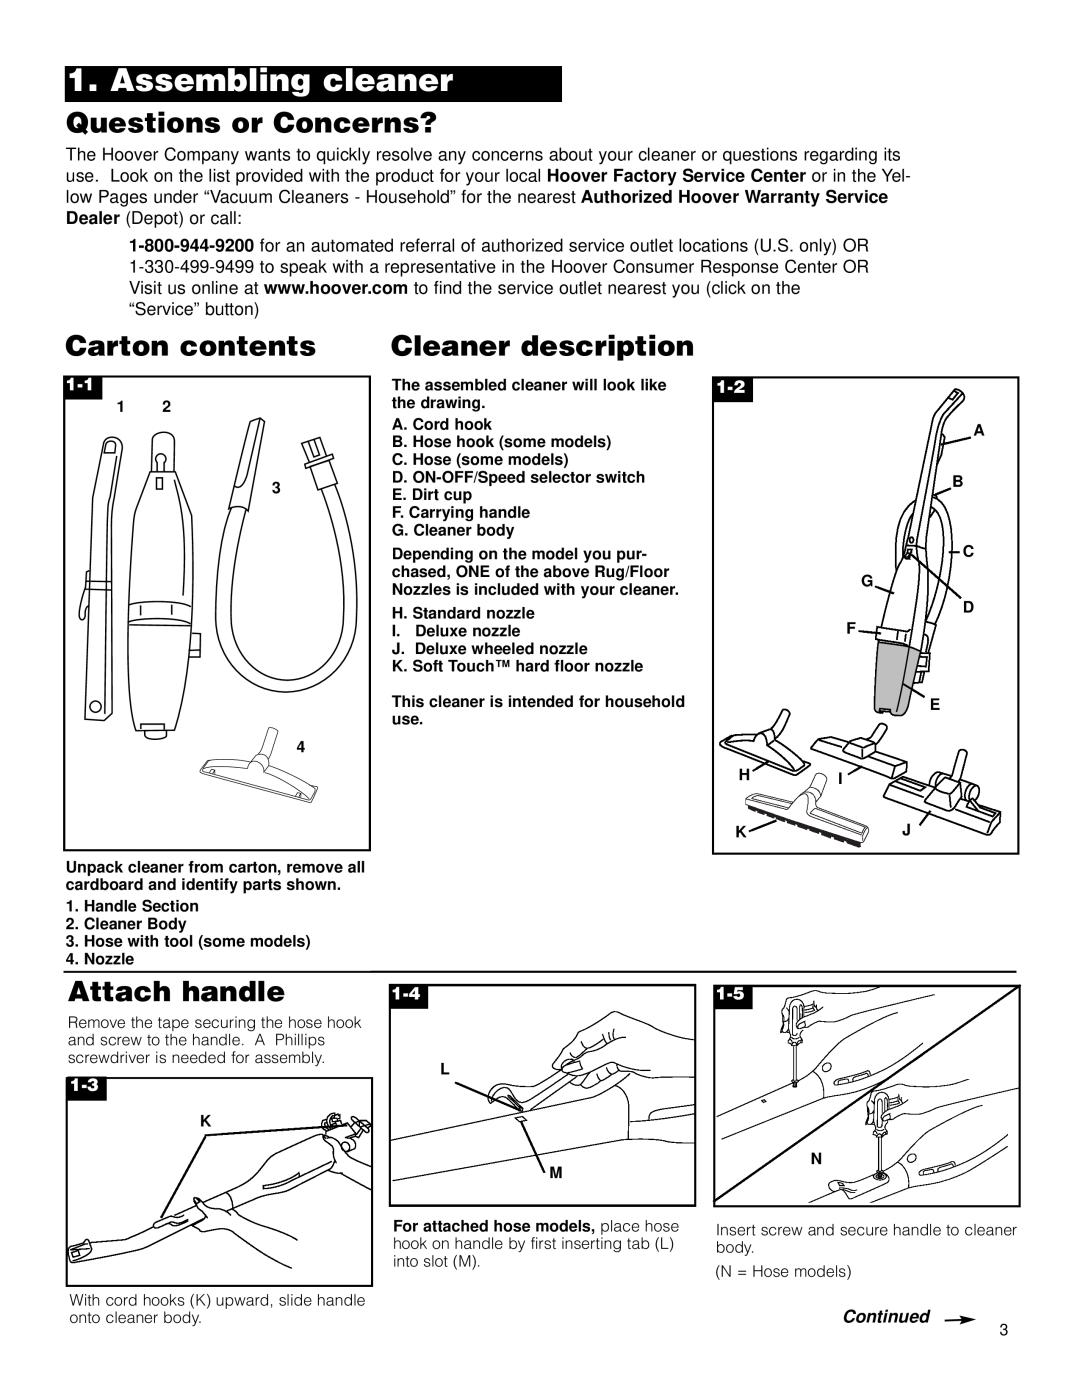 Hoover Stick Cleaner Assembling cleaner, Questions or Concerns?, Carton contents, Cleaner description, Attach handle 